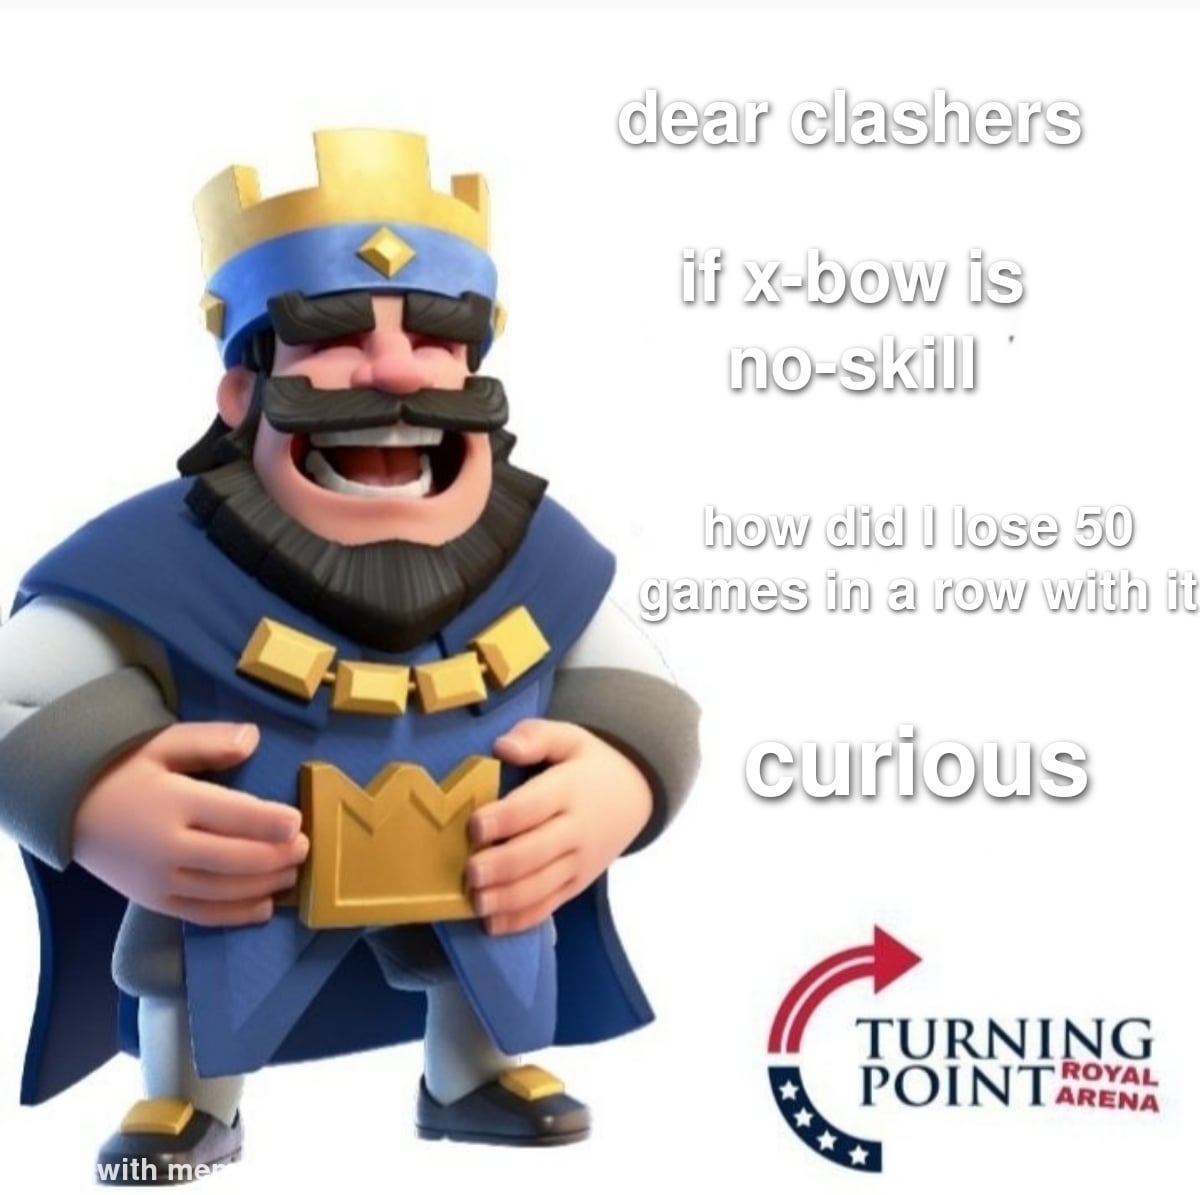 clashers meaning